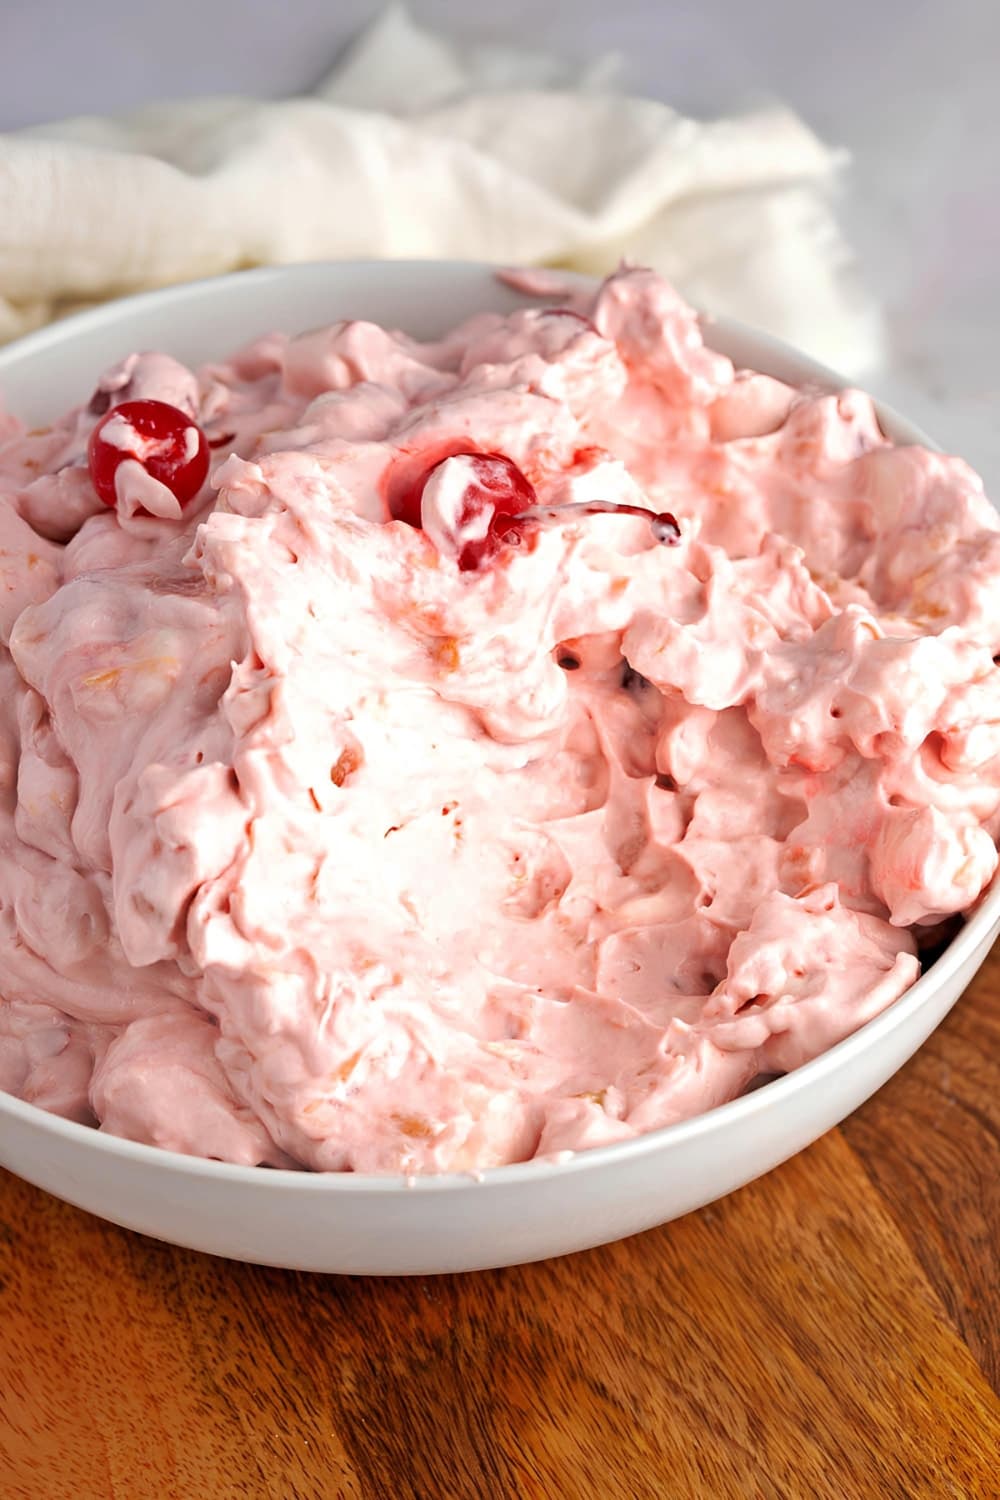 Bowl of Cherry Fluff on a Wooden Board